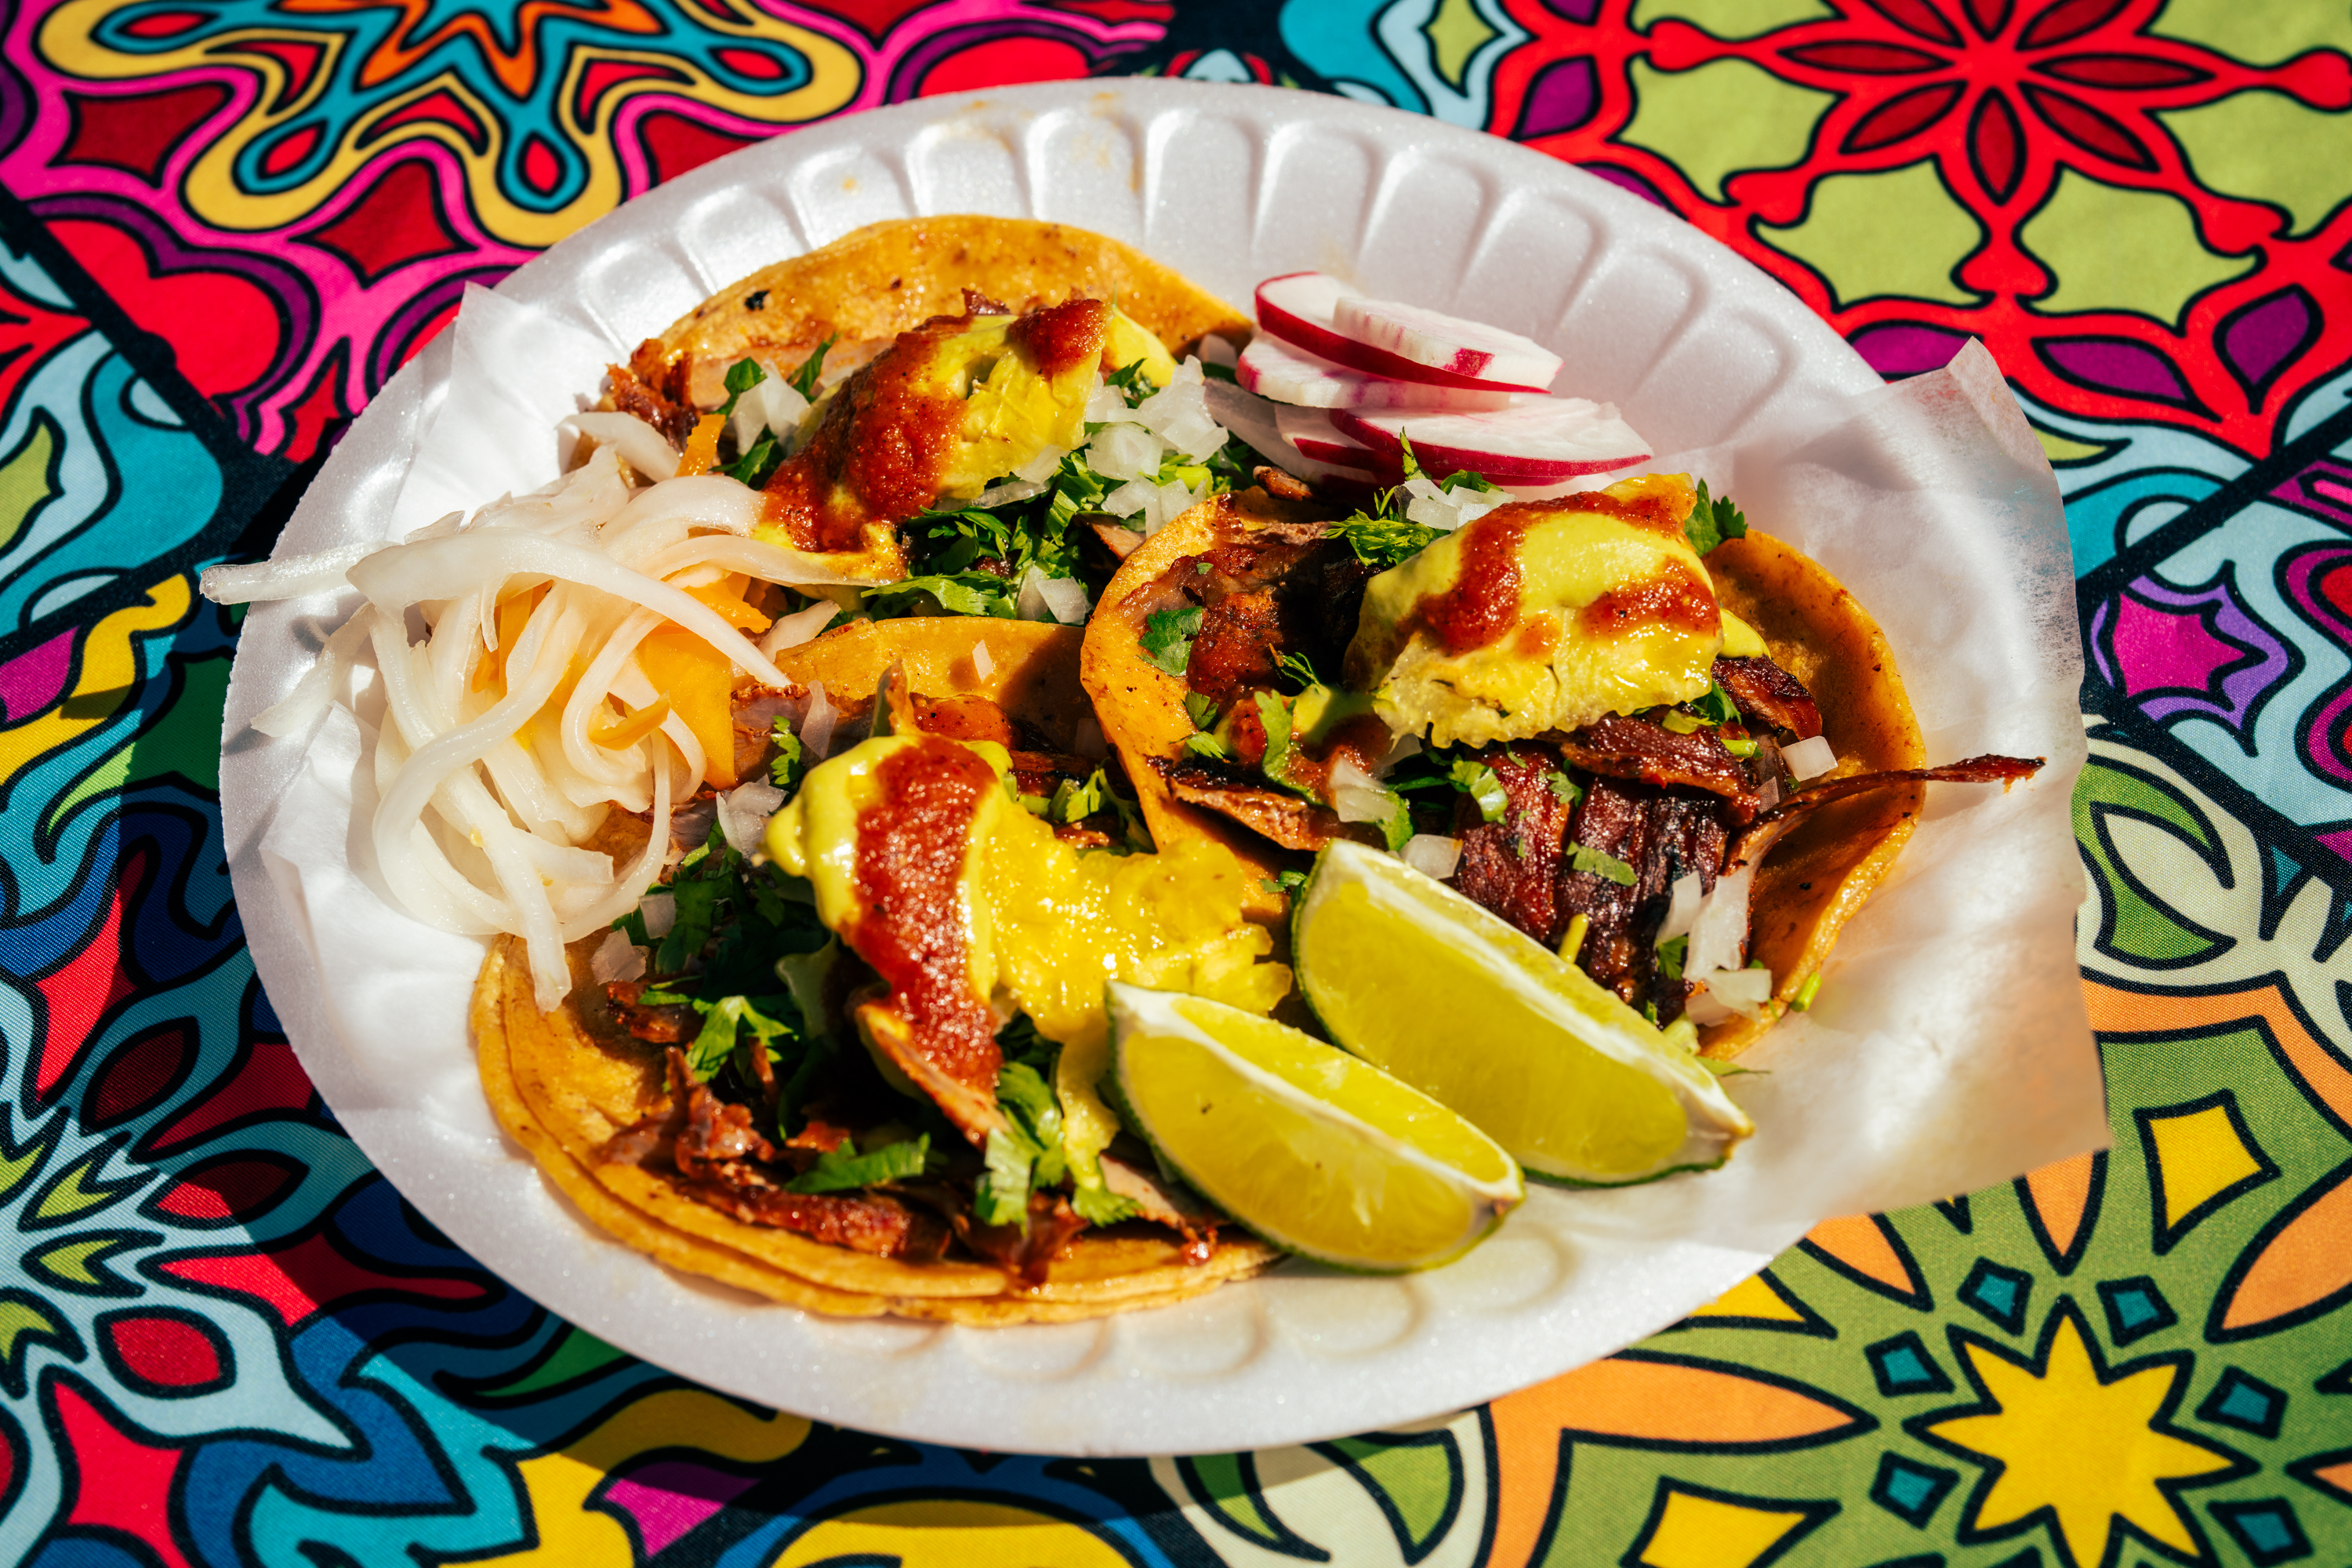 A plate of El Charro's signature al pastor tacos features perfectly marinated and thinly cut pork served to order for hungry customers at the curbside food stand.